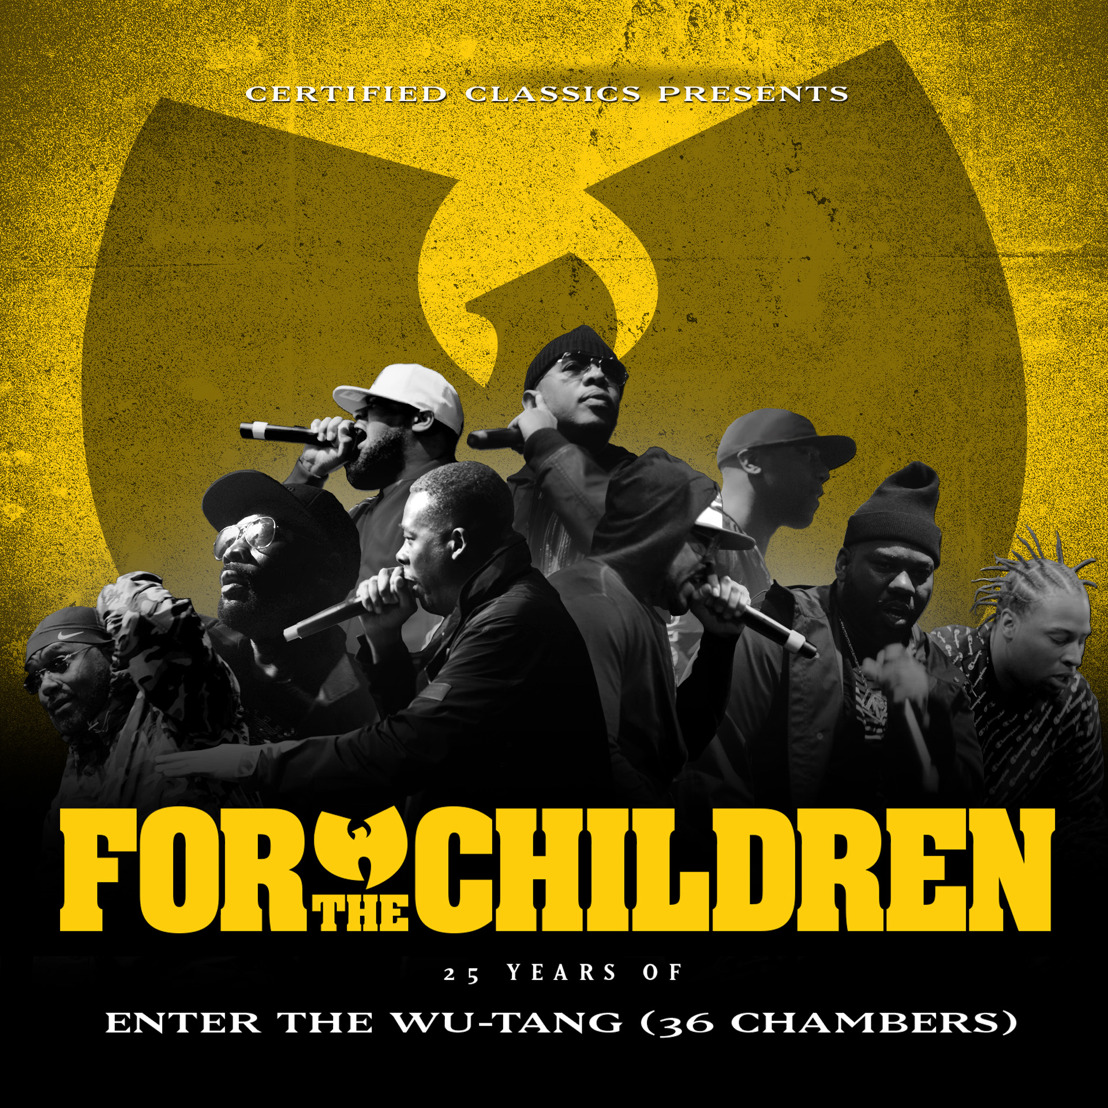 TO CELEBRATE THE 25TH ANNIVERSARY OF ENTER THE WU-TANG (36 CHAMBERS) CERTIFIED CLASSICS RELEASES FOR THE CHILDREN:25 YEARS OF ENTER THE WU-TANG (36 CHAMBERS) SHORT FILM